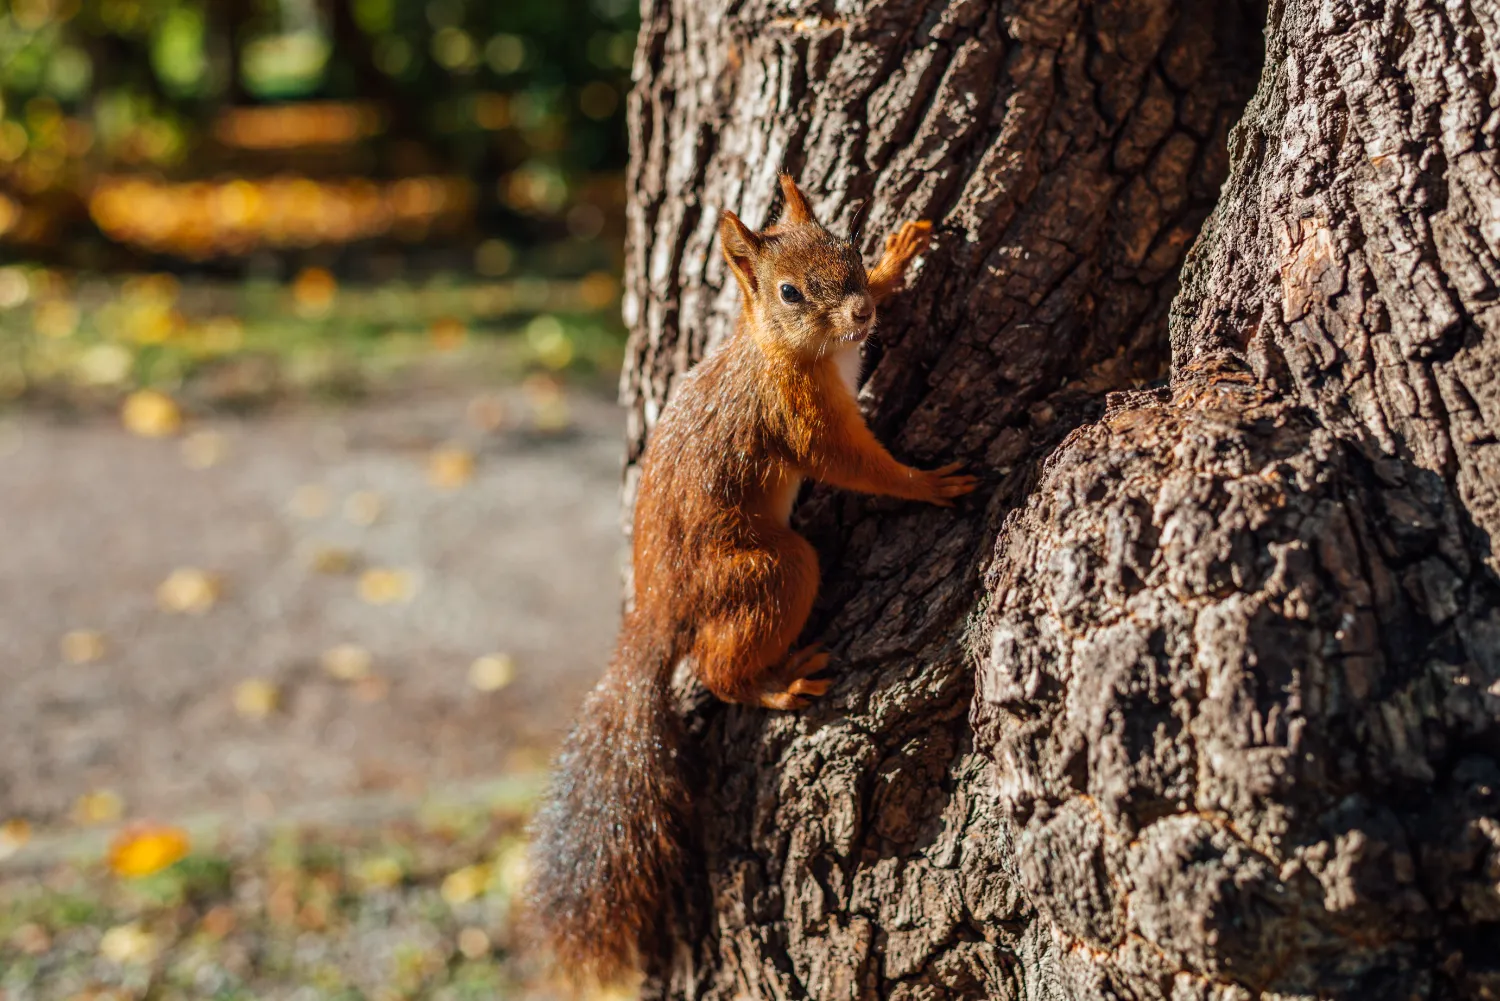 Squirrel on tree in park